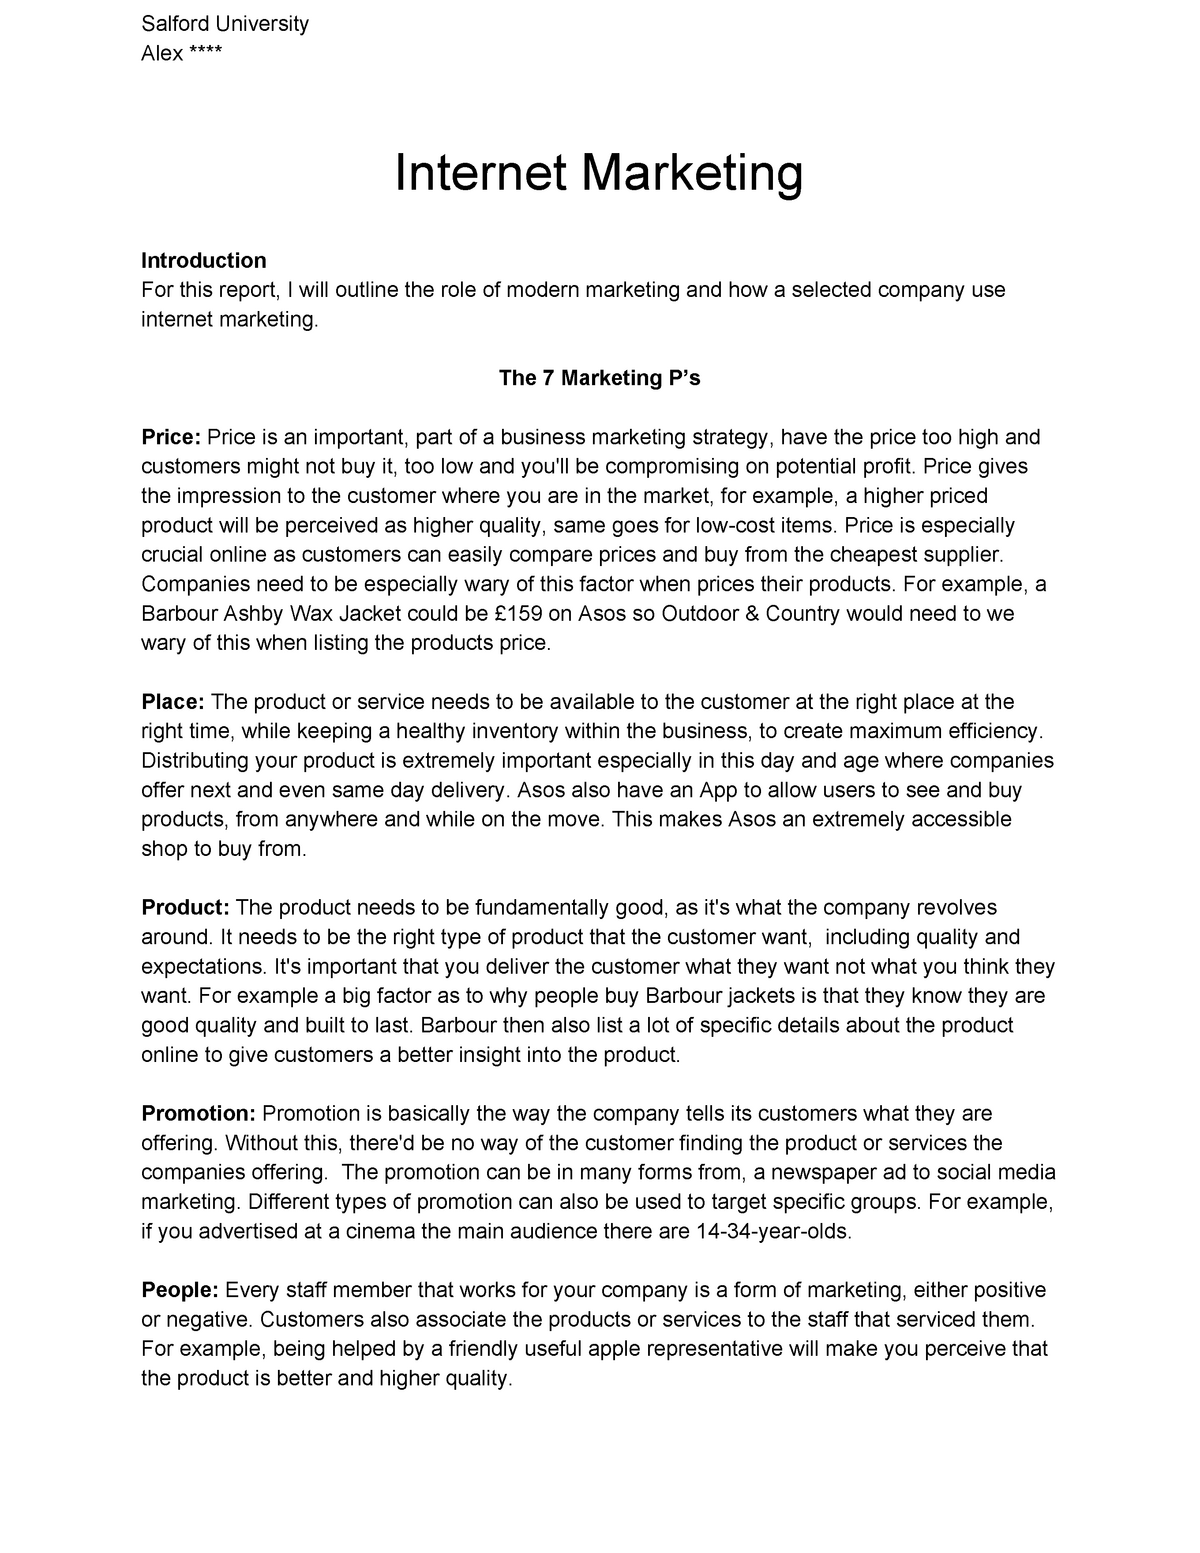 marketing report introduction example